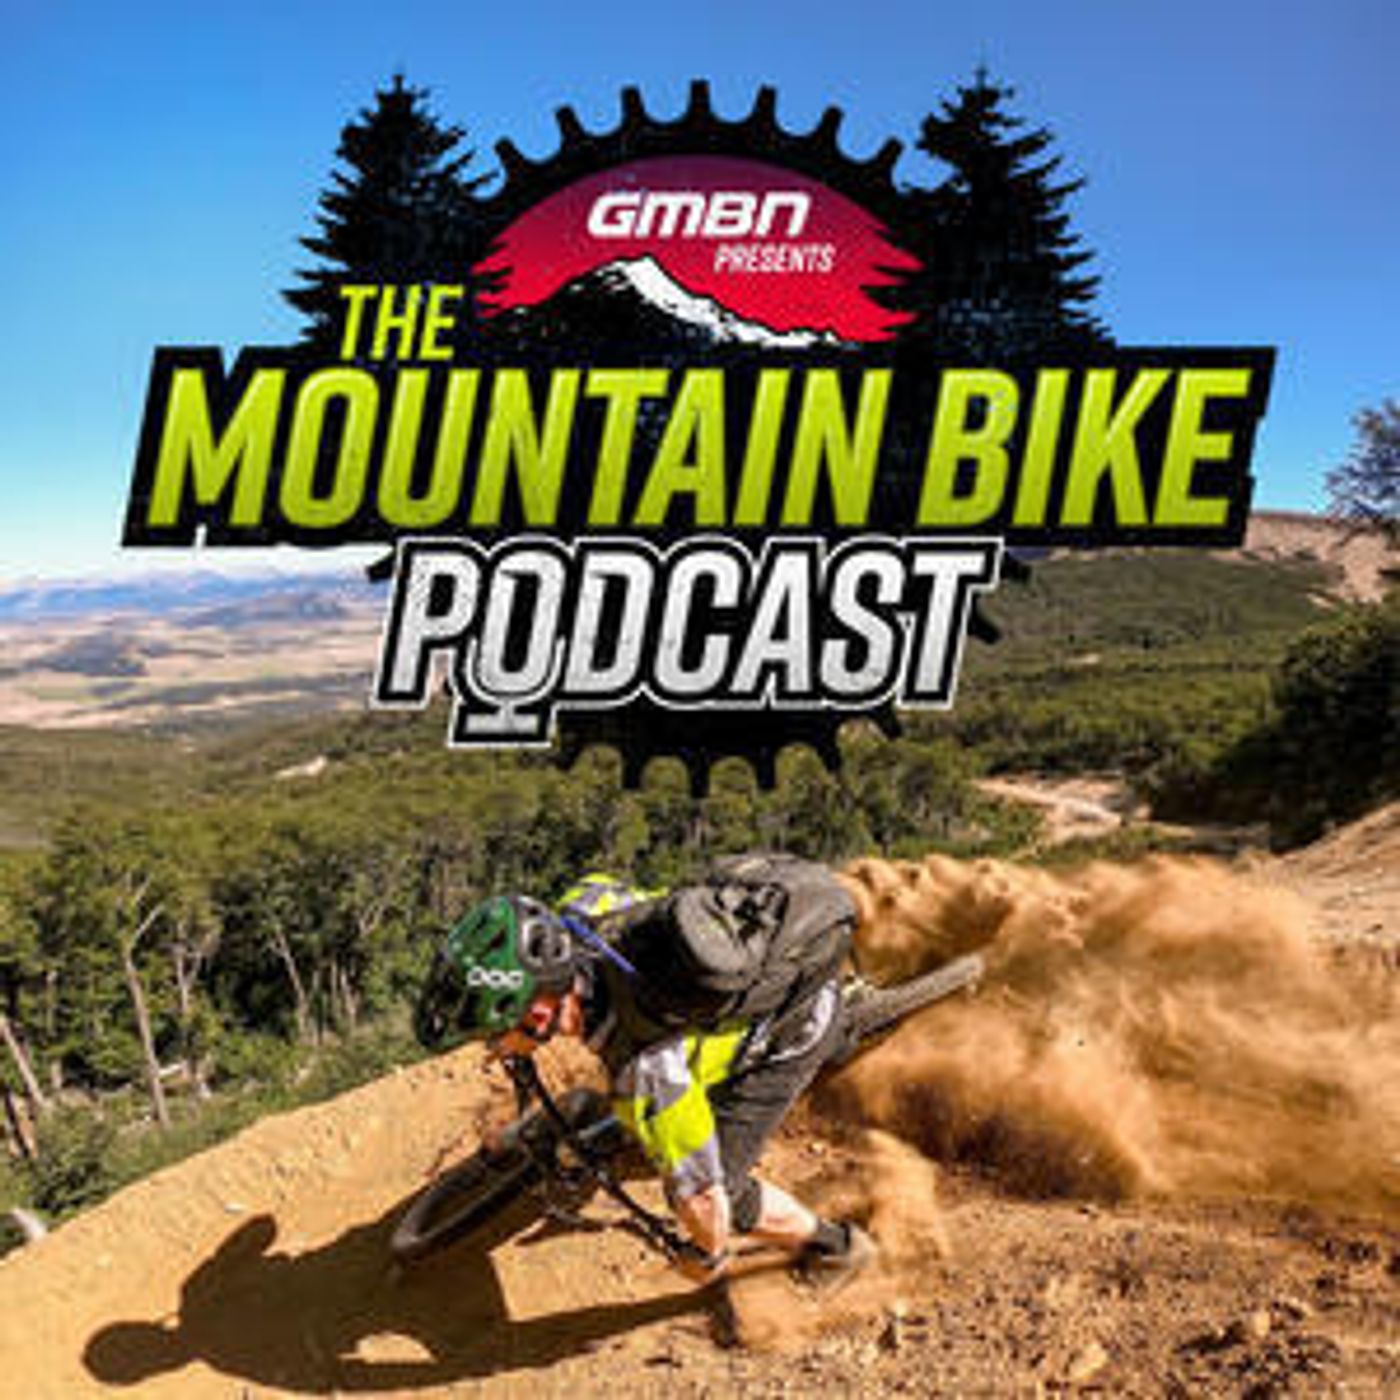 17: The Mountain Bike Podcast By GMBN #17 | Is Crankworx The Biggest Mountain Bike Event?